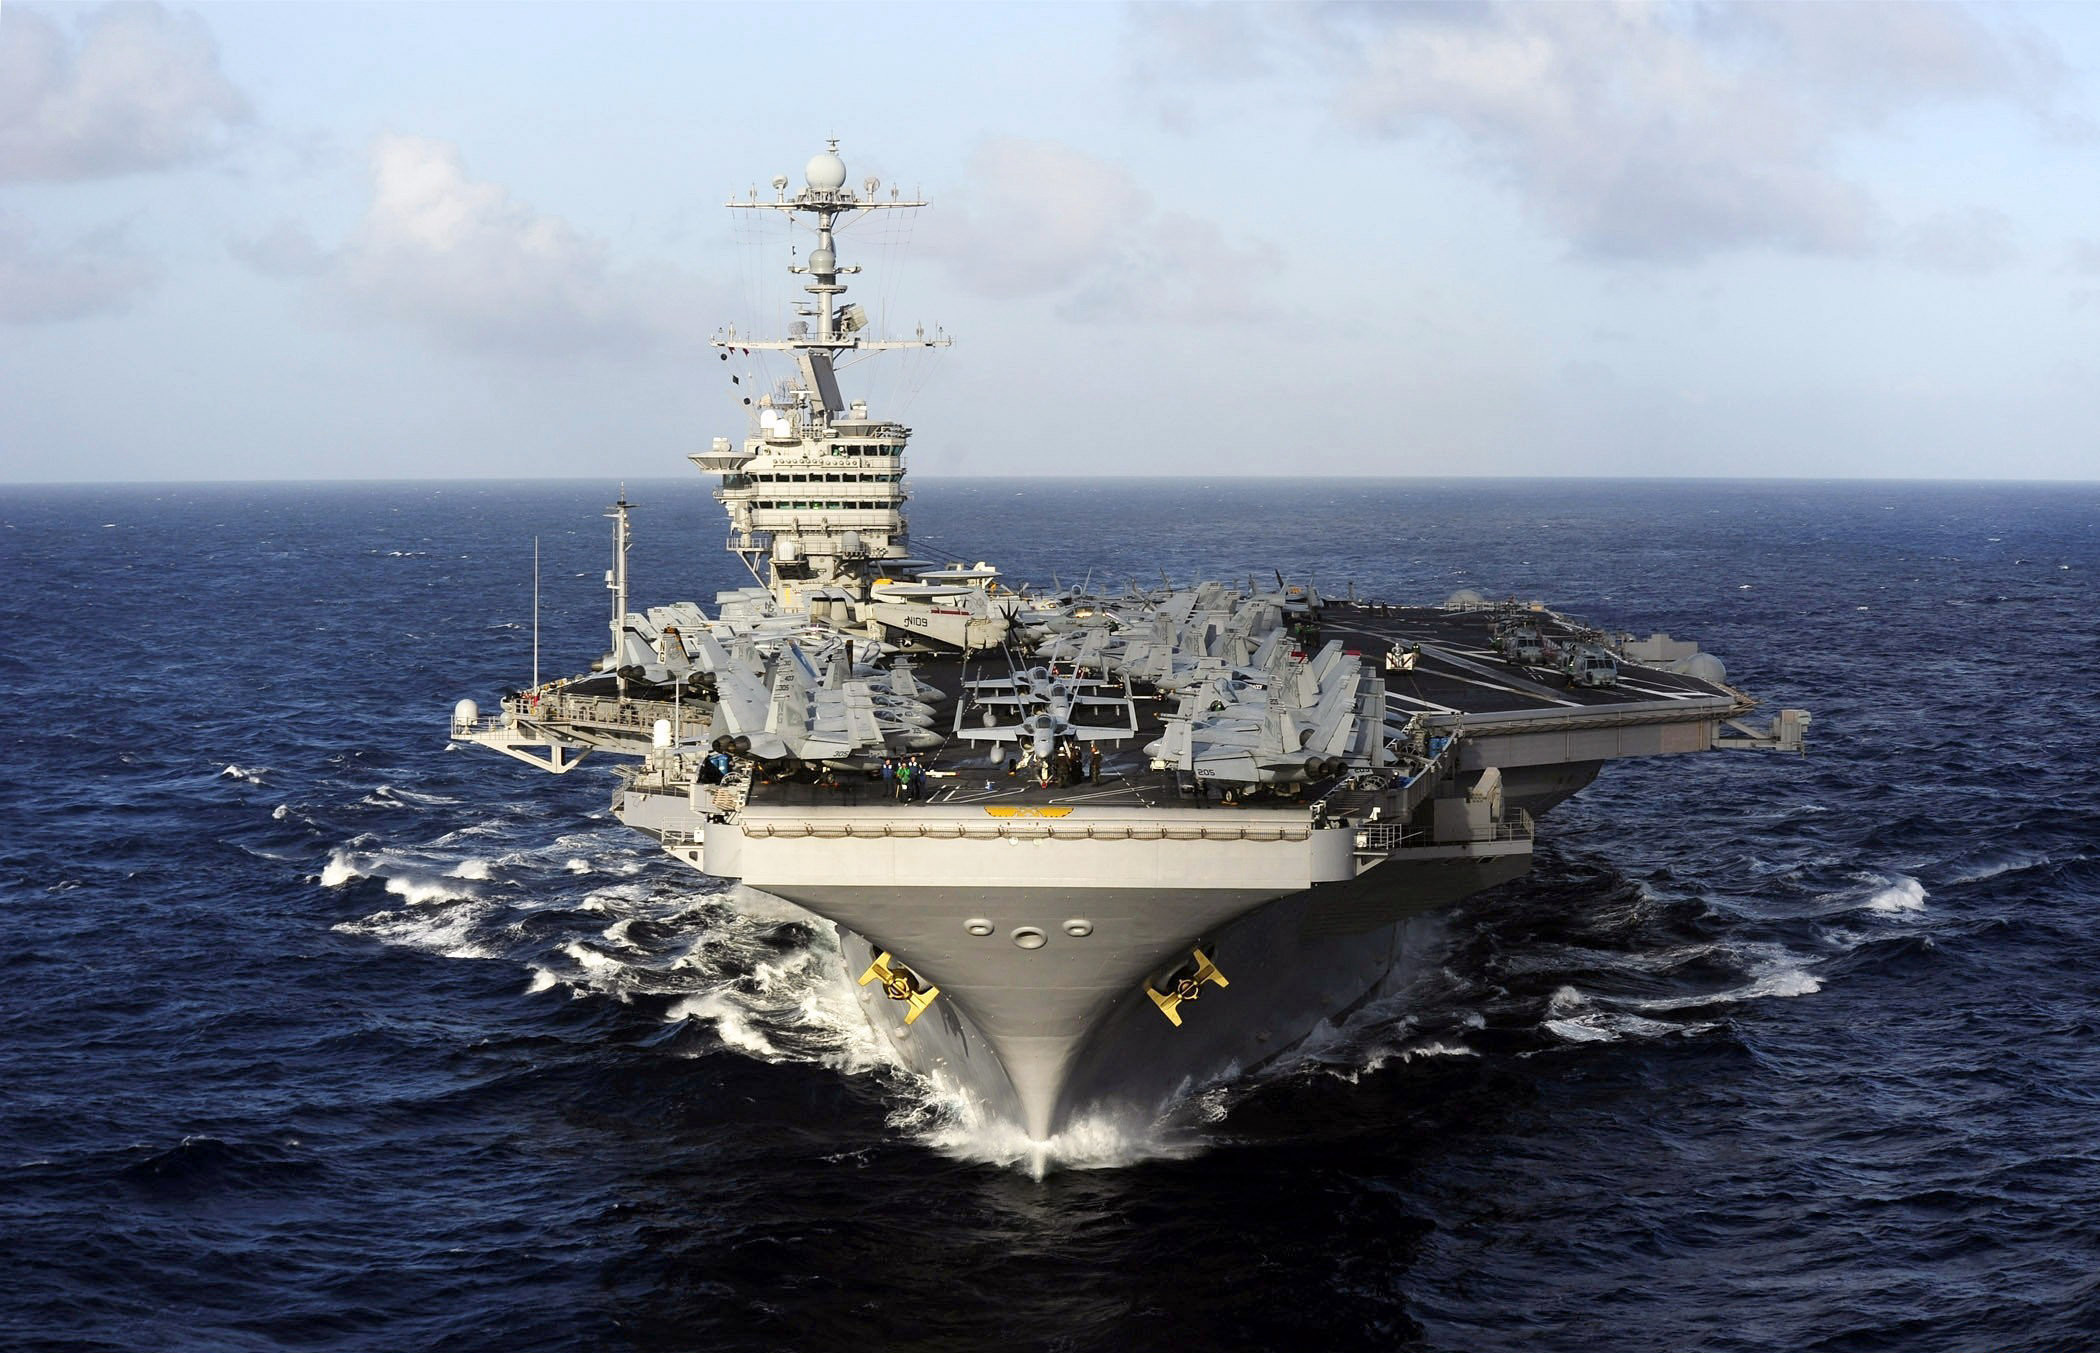 Aircraft carrier wallpaper pictures